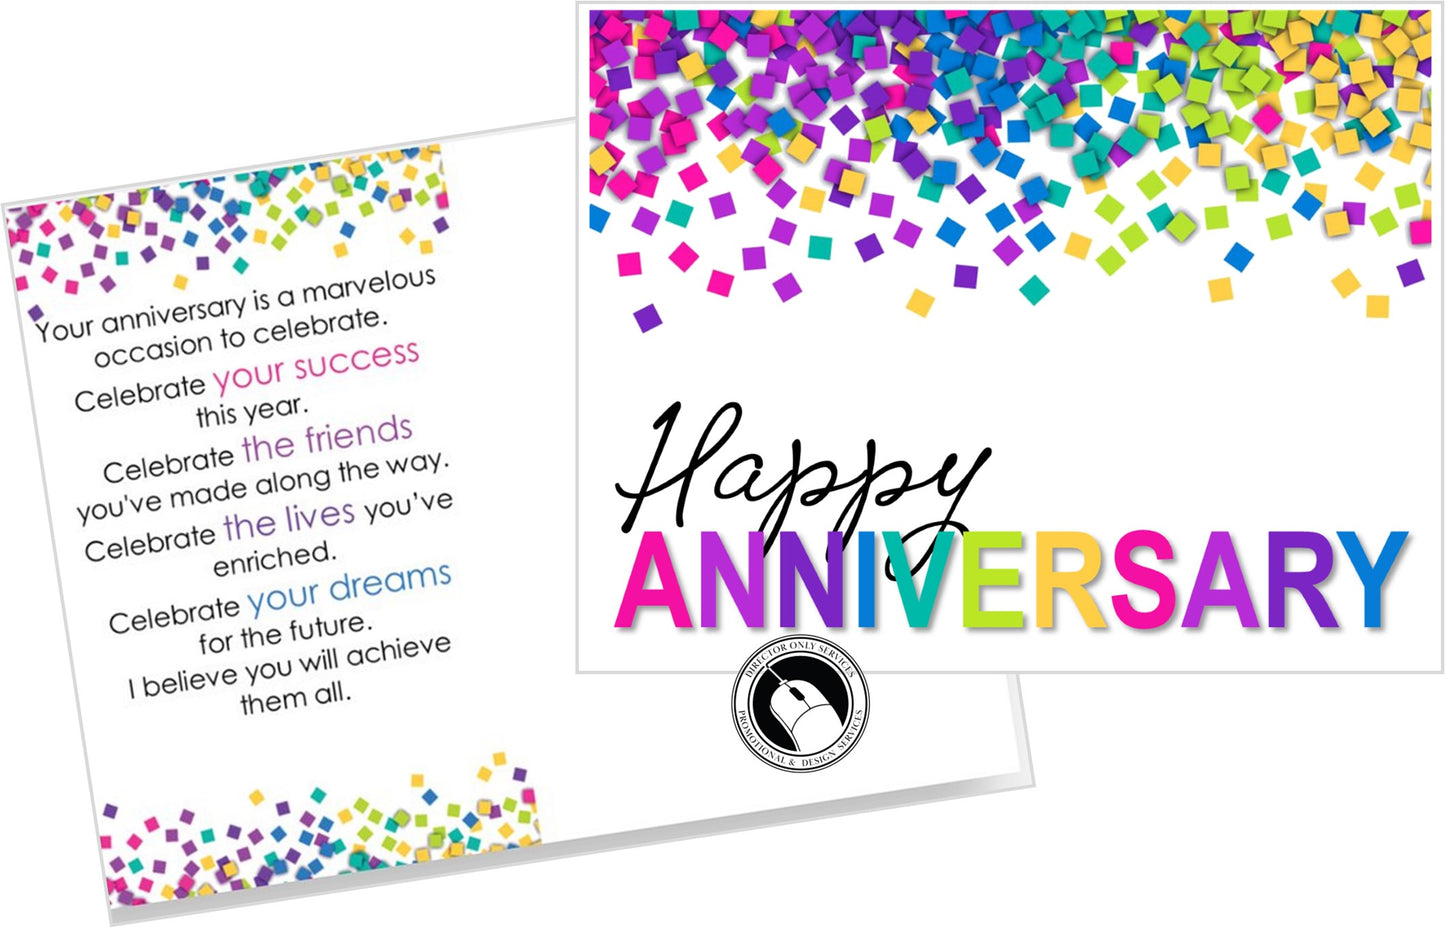 Business Anniversary Postcard -Colorful